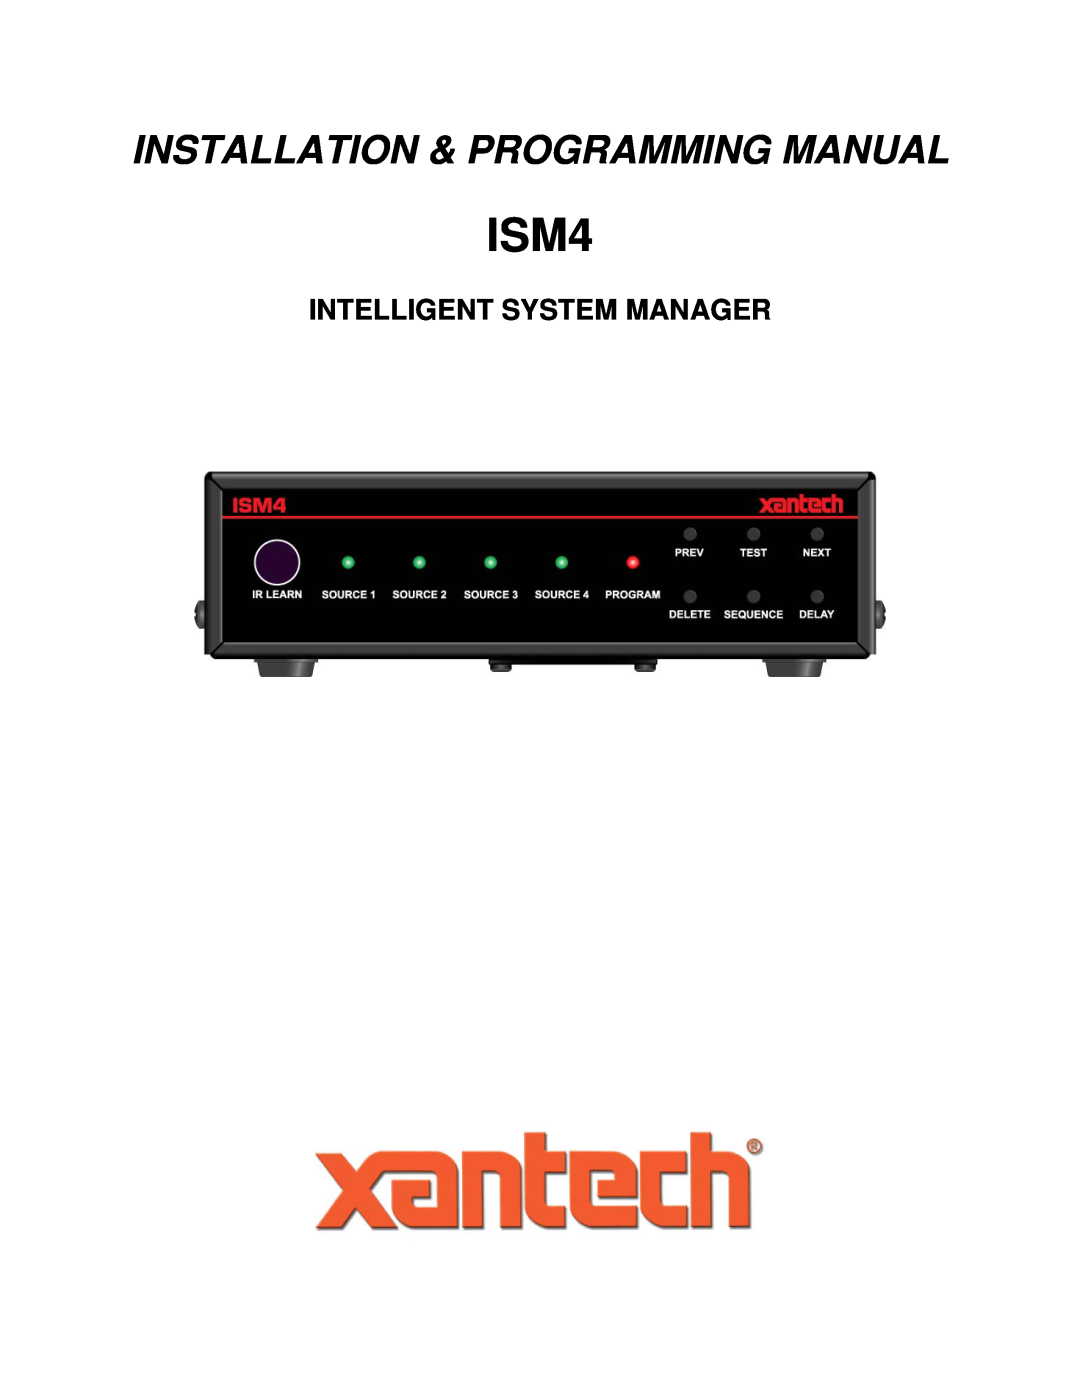 Xantech ISM4 manual Installation & Programming Manual, Intelligent System Manager 